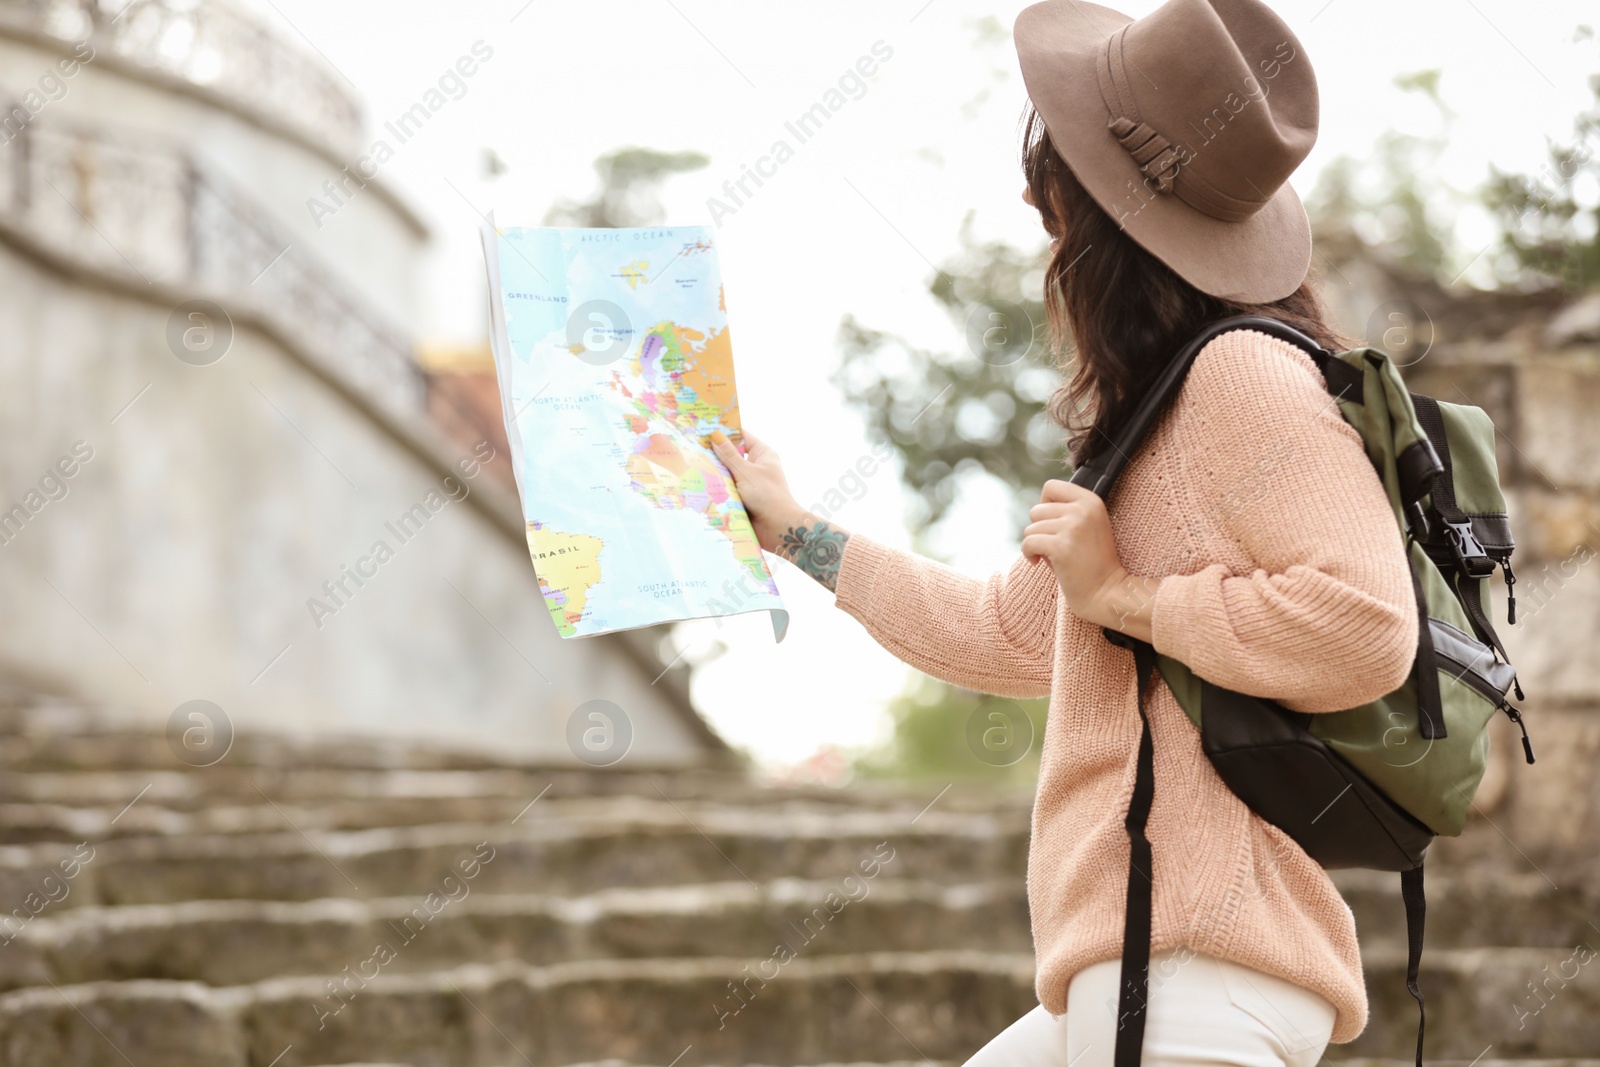 Photo of Traveler with map and backpack on city street